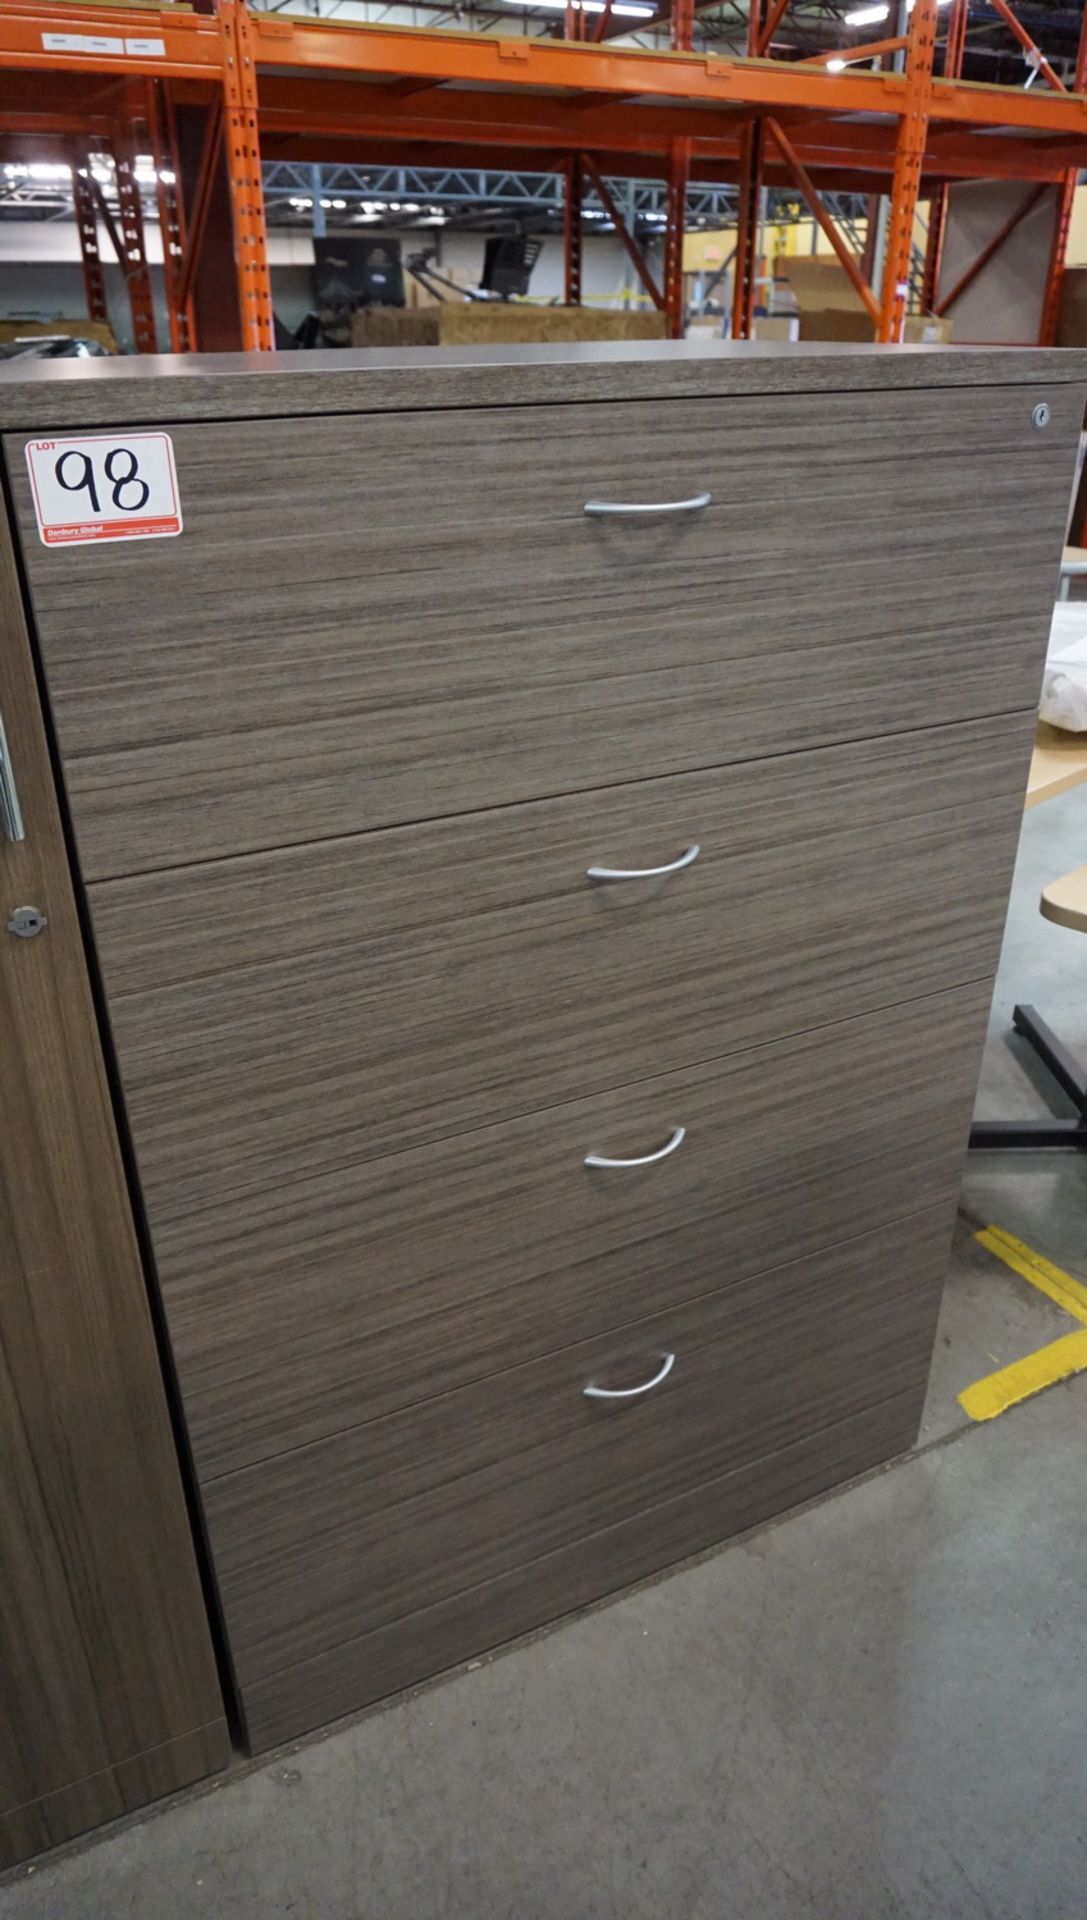 WOODGRAIN 2' X 3' X 53"H 3-DRAWER LATERAL FILE CABINET